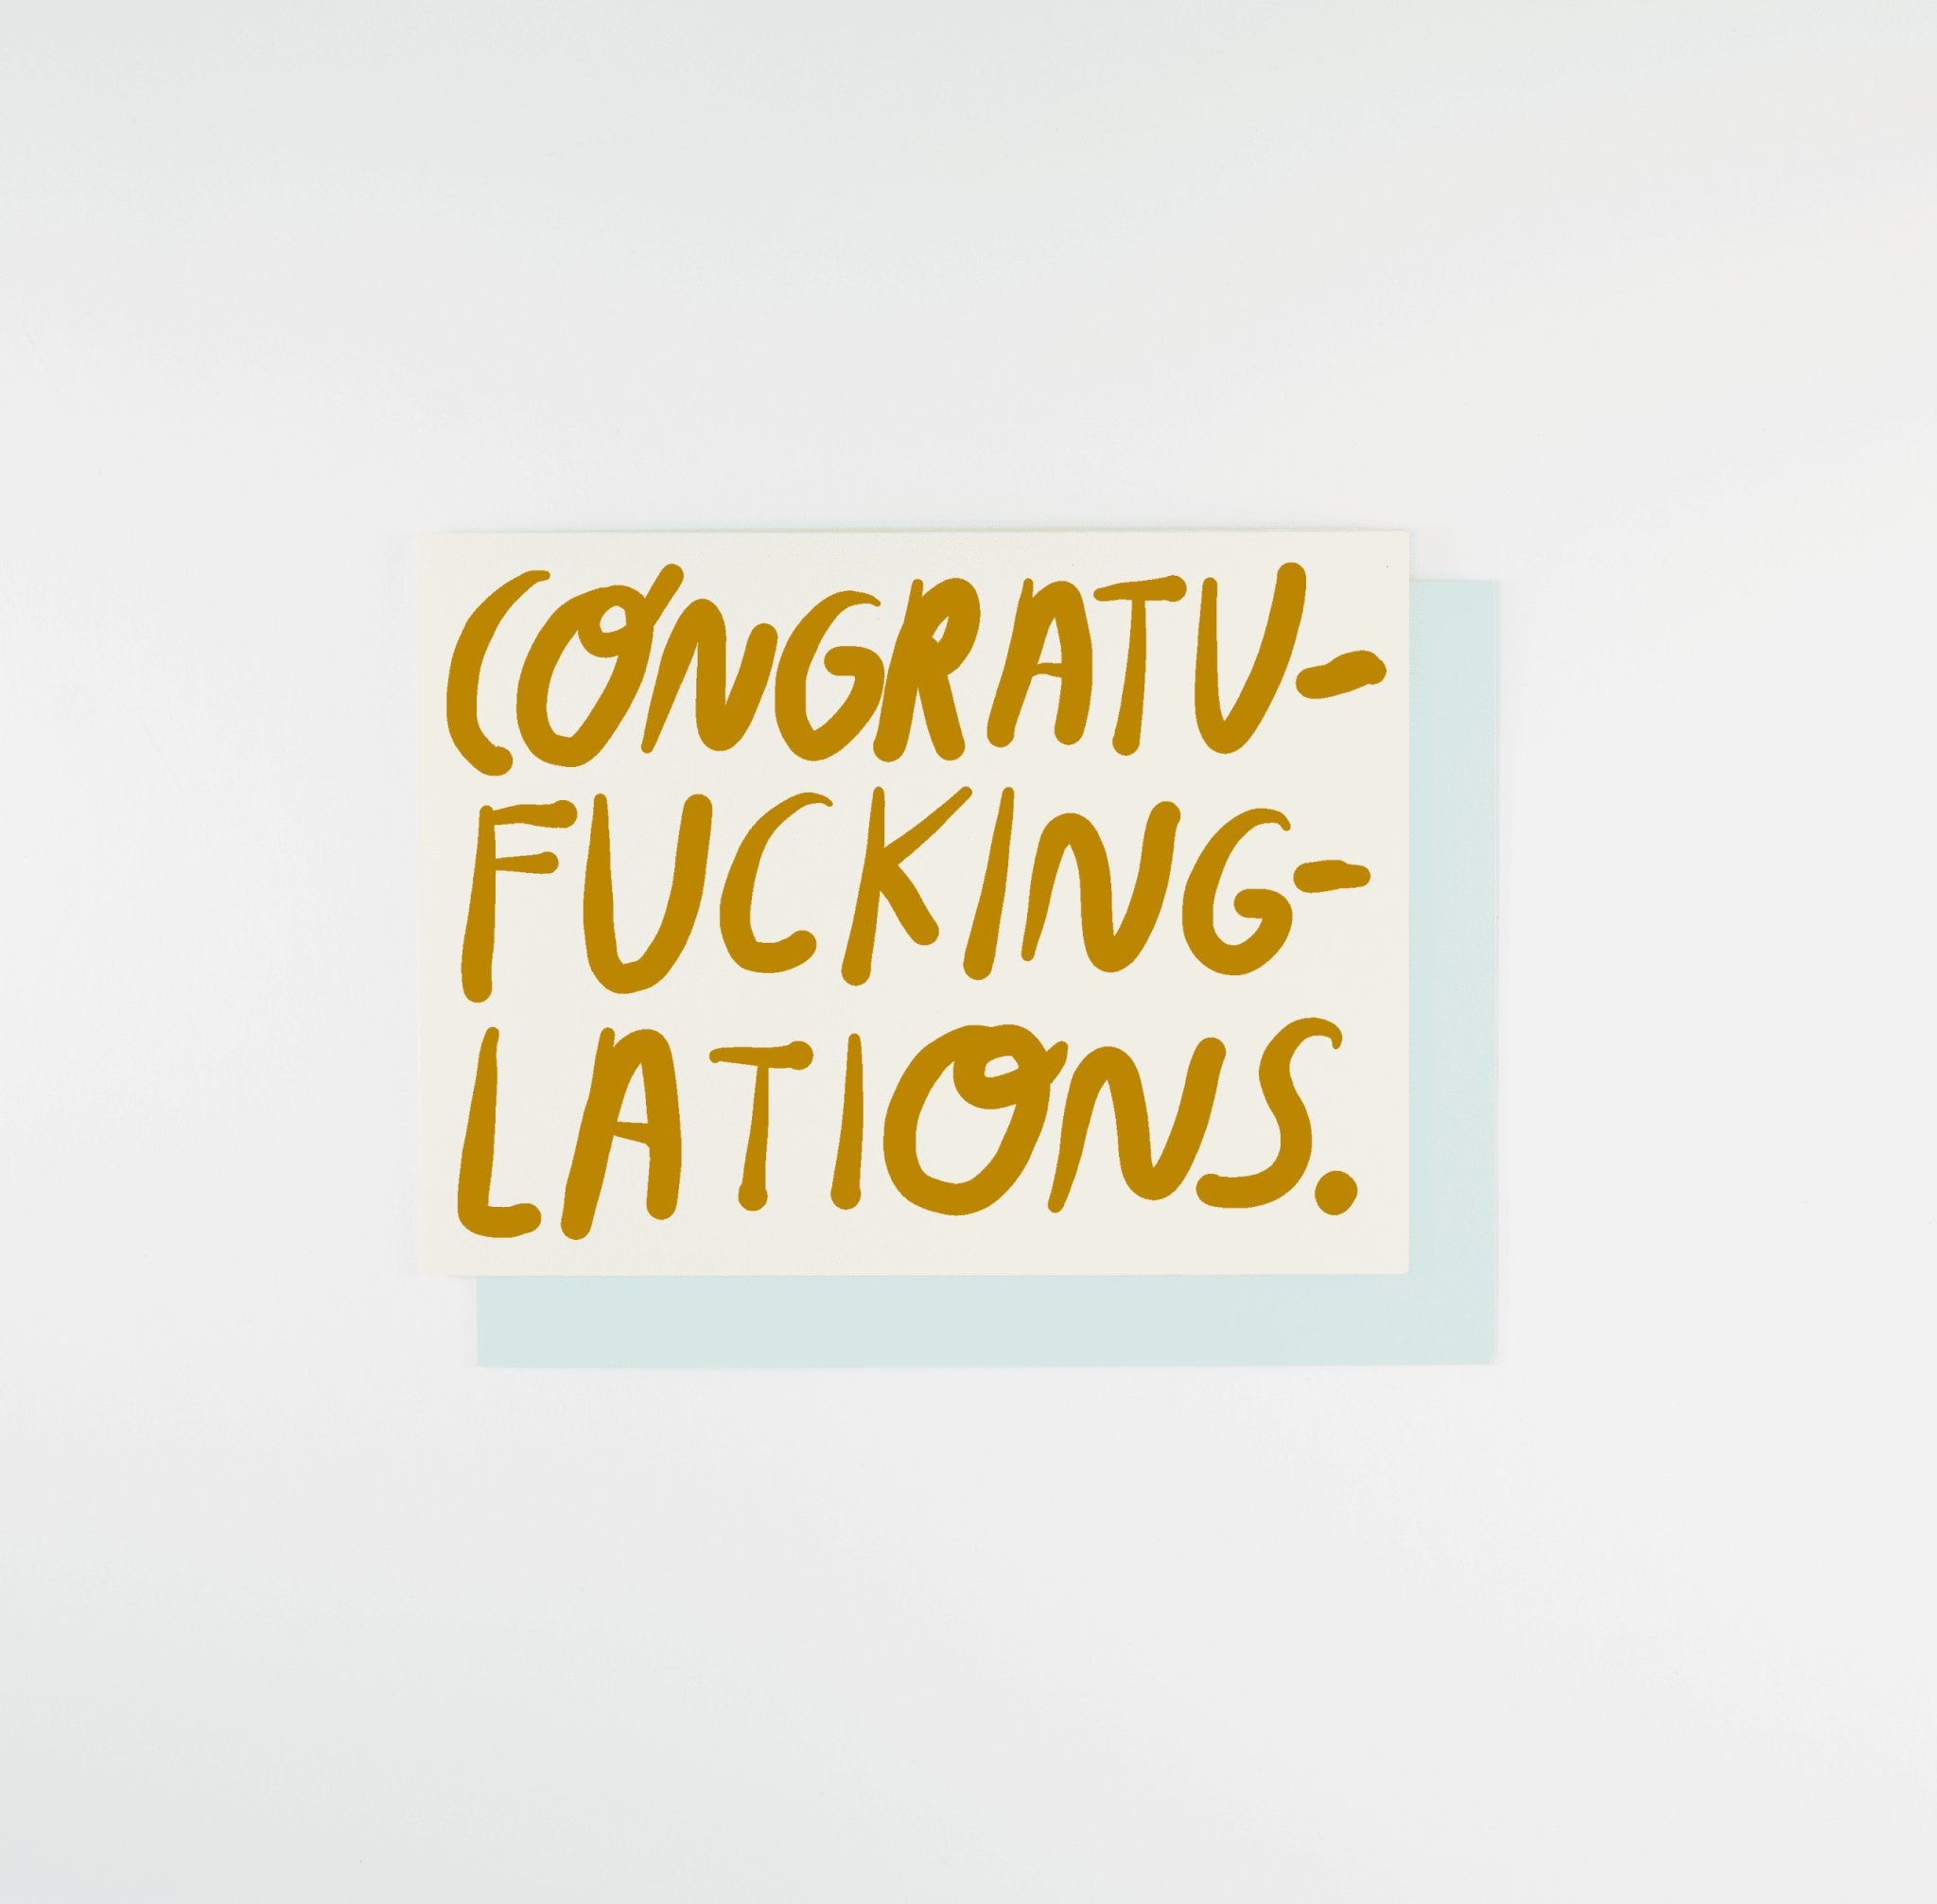 Congratu-fucking-lations Greeting Card - Greeting & Note Cards